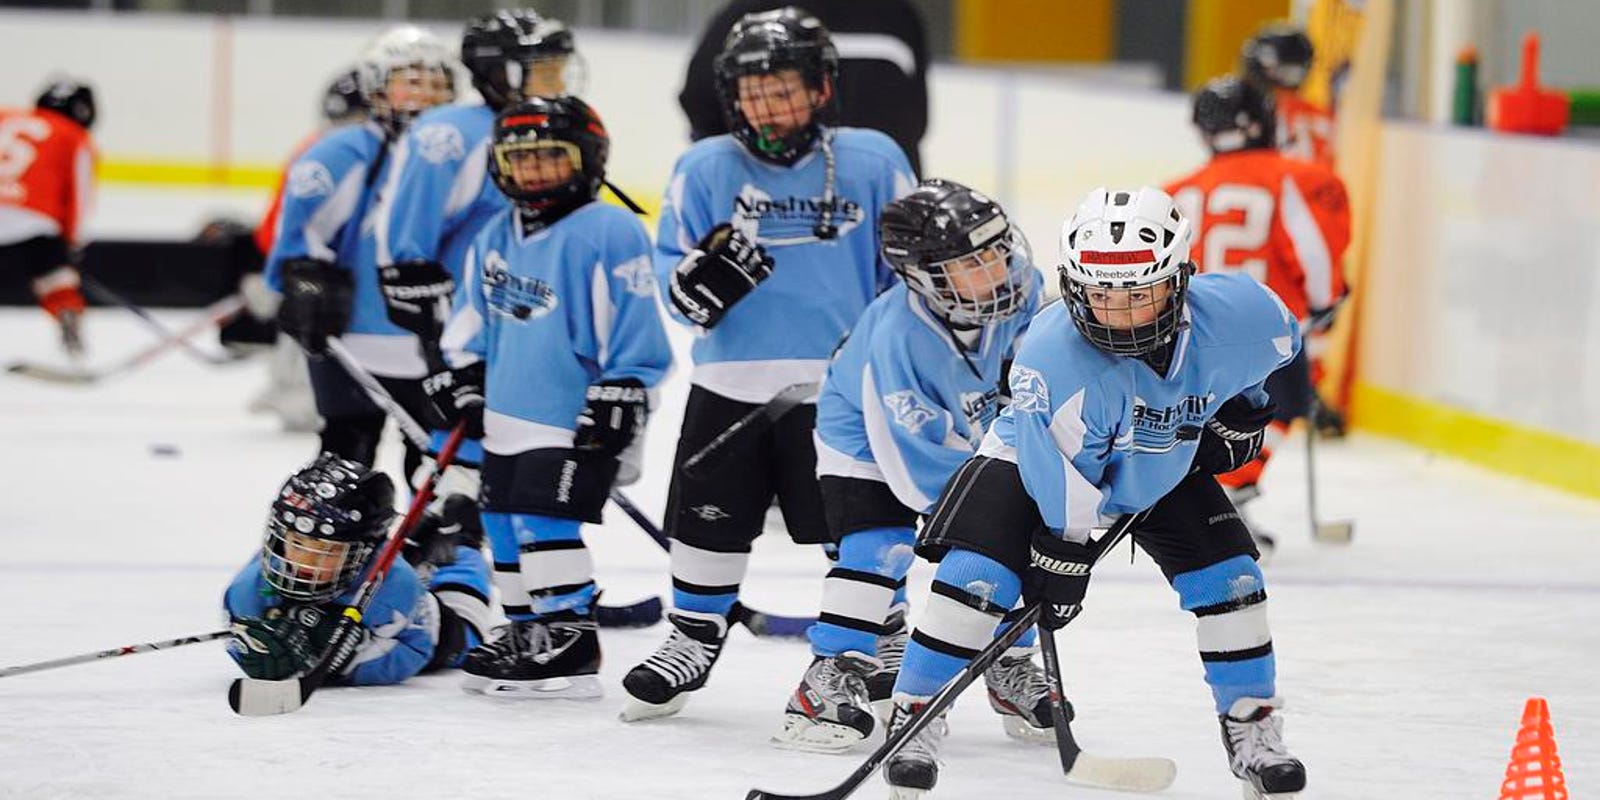 Your guide to youth hockey in Nashville